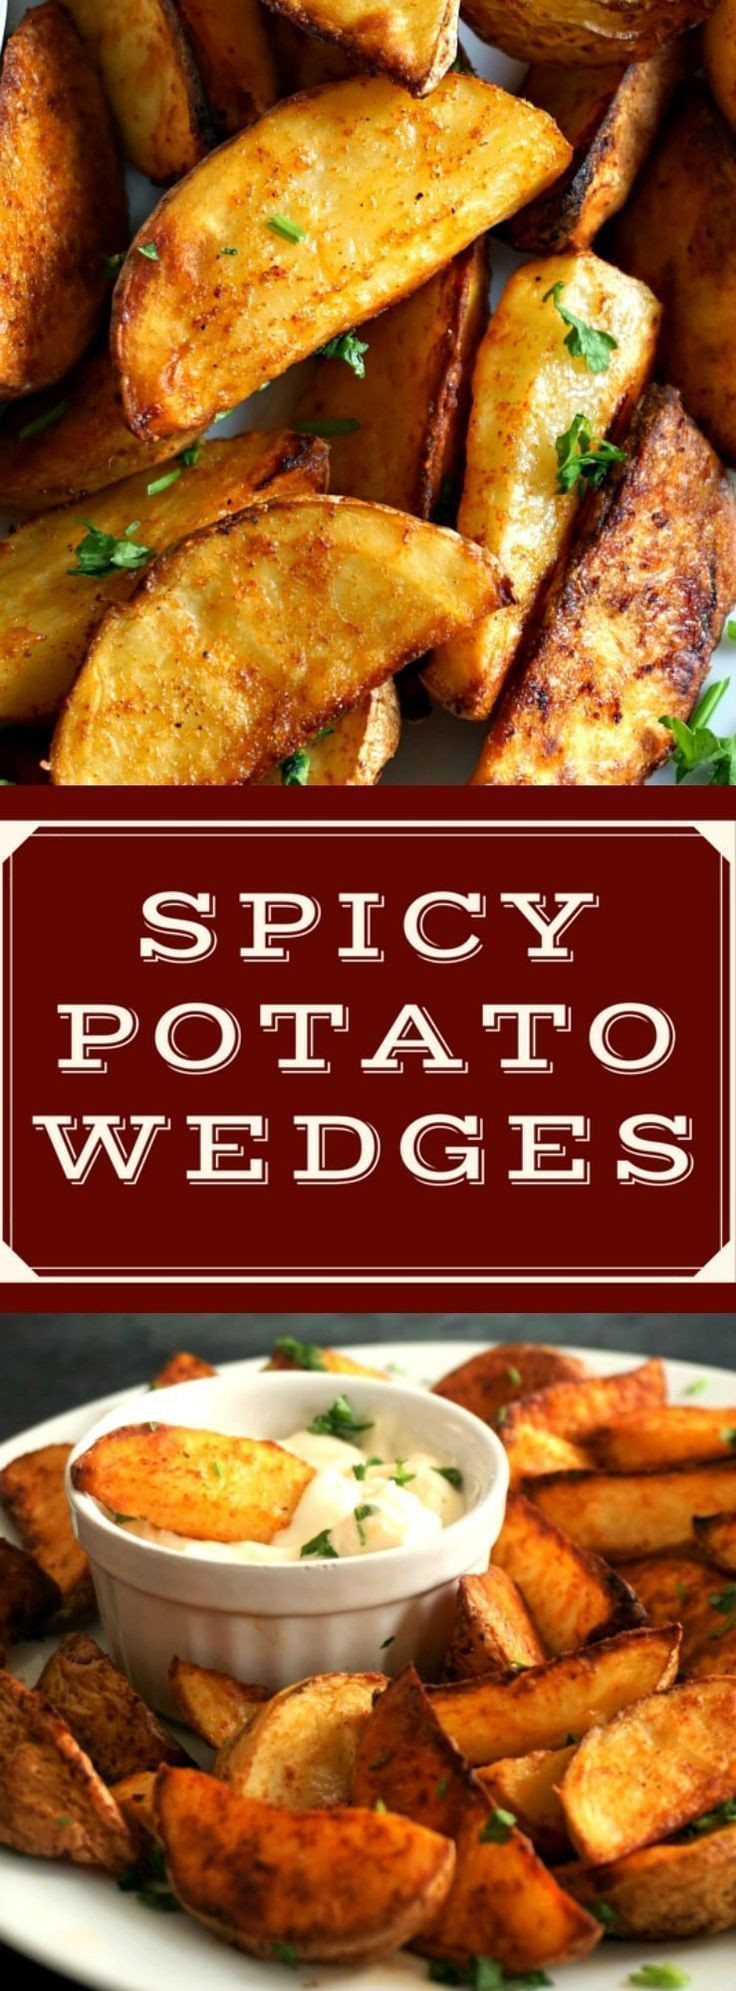 Healthy Side Dishes For Burgers
 Best 25 Side dishes for burgers ideas on Pinterest